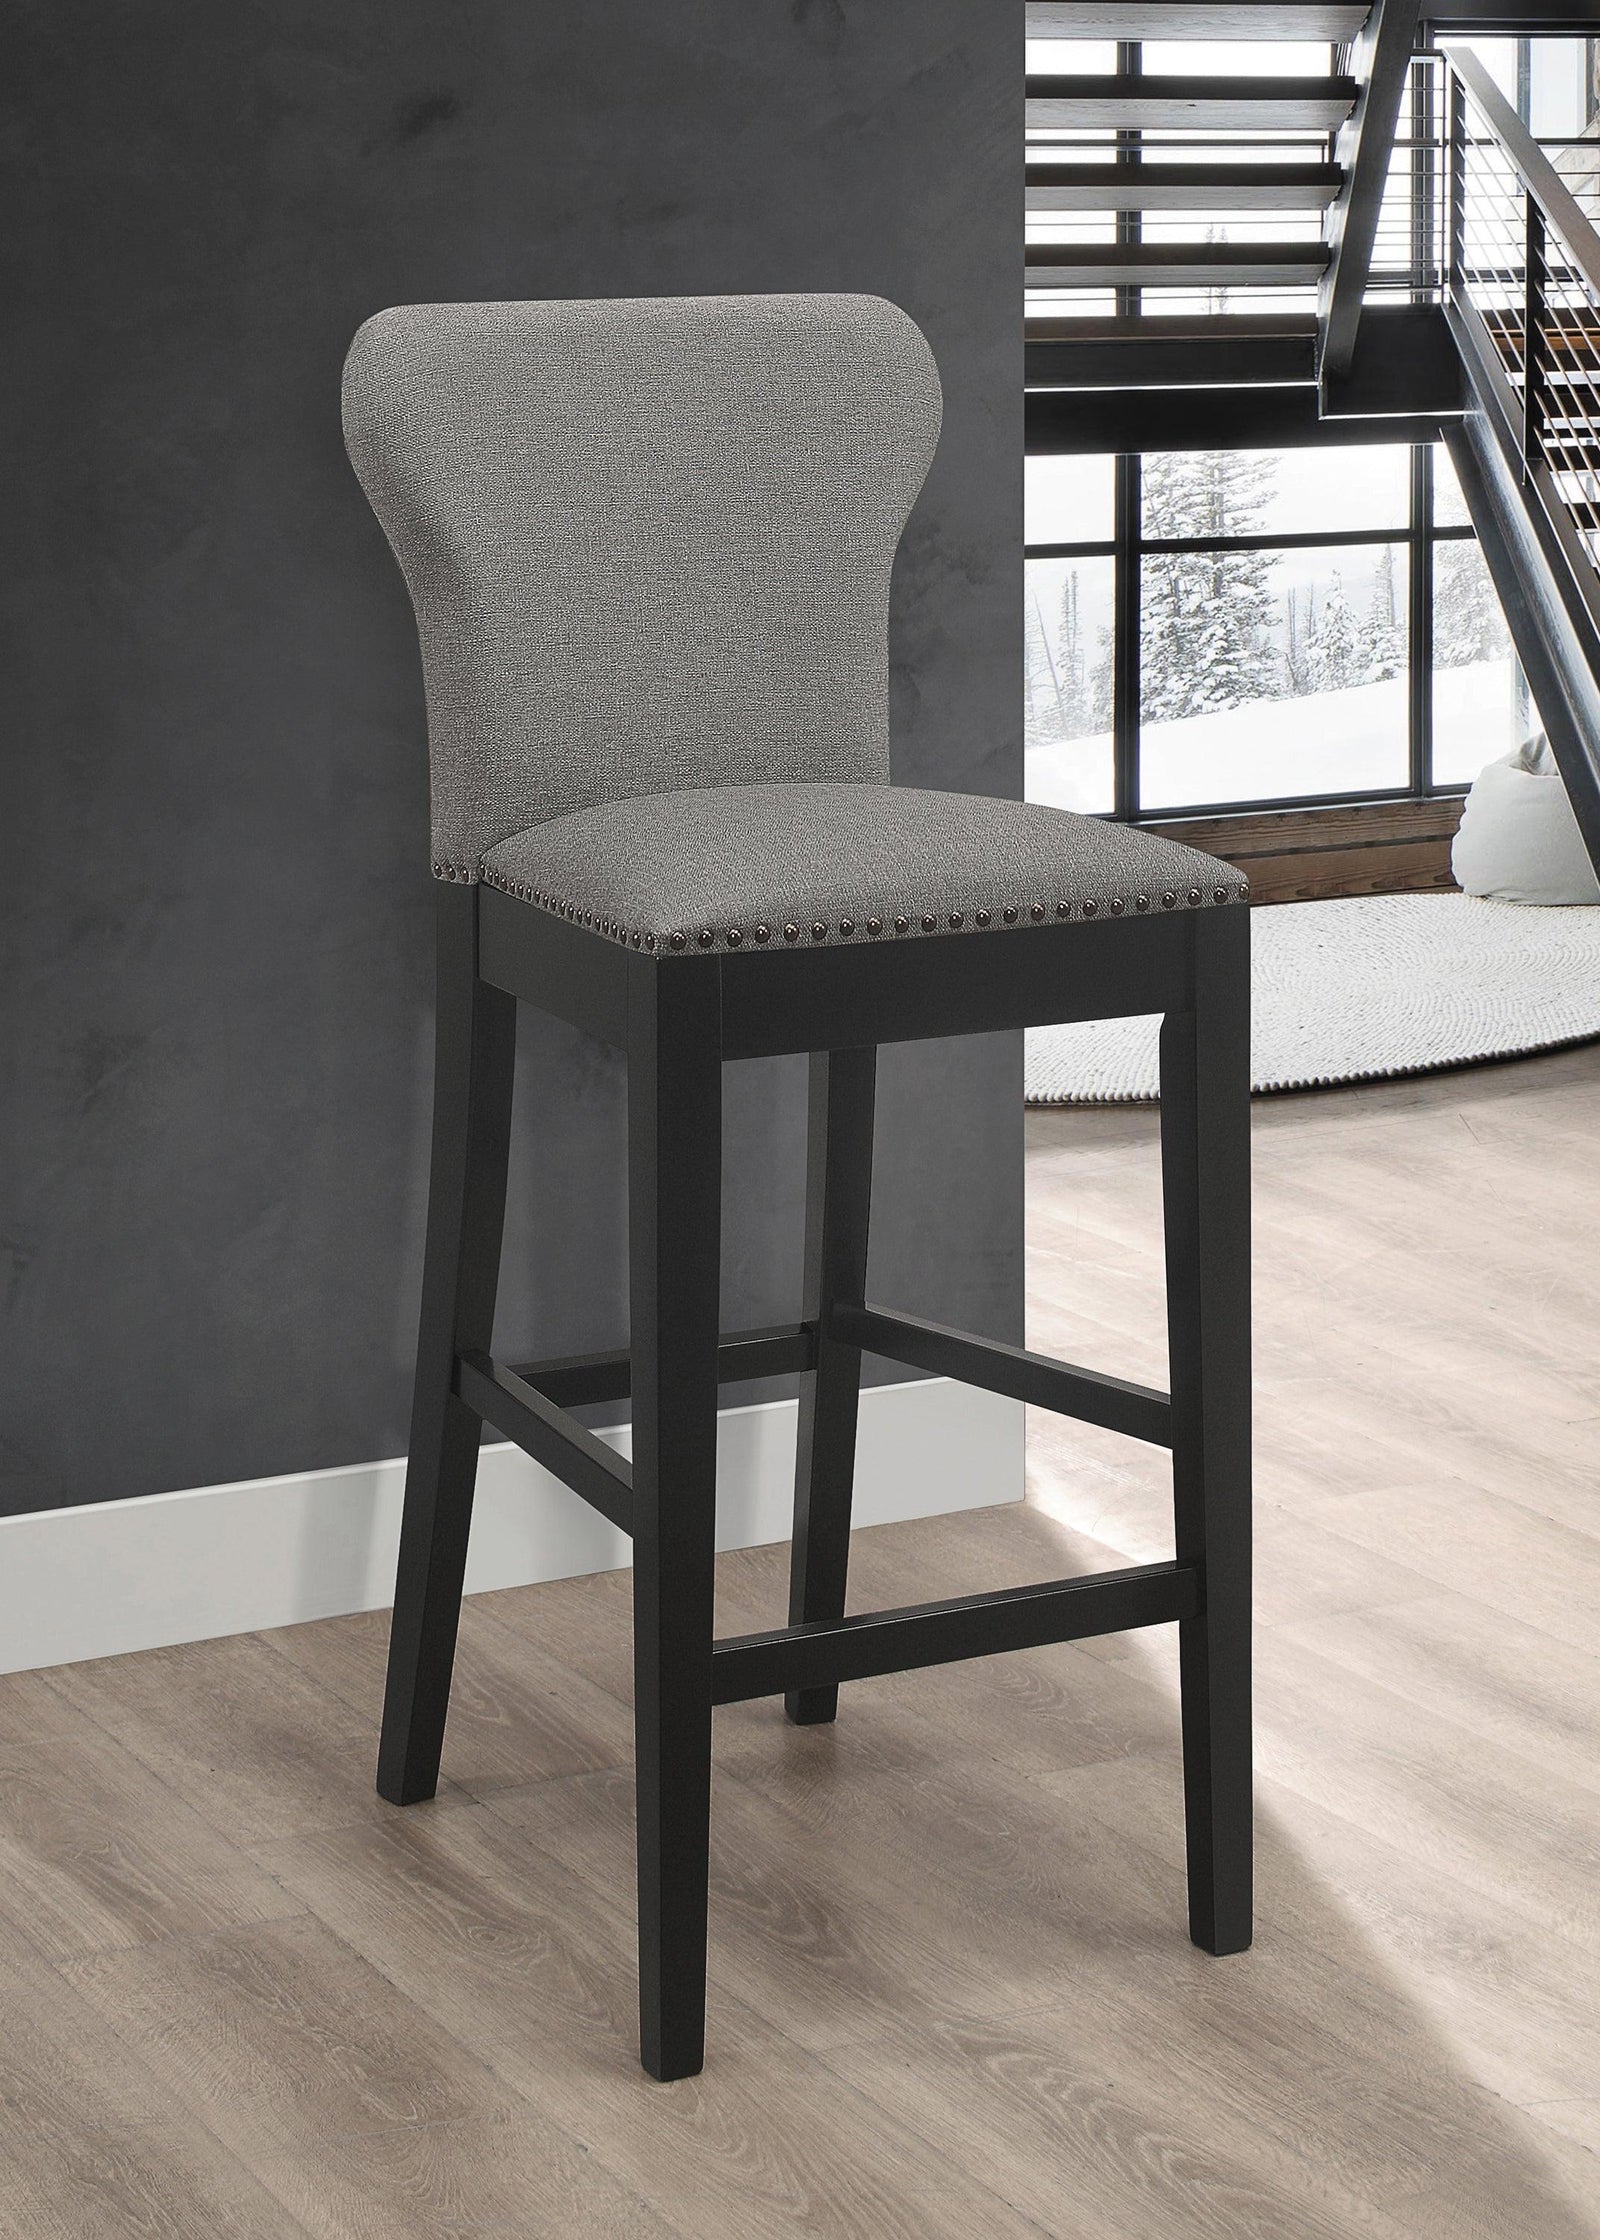 Ralland Upholstered Solid Back Bar Stools With Nailhead Trim (Set Of 2) Grey And Black - Ella Furniture